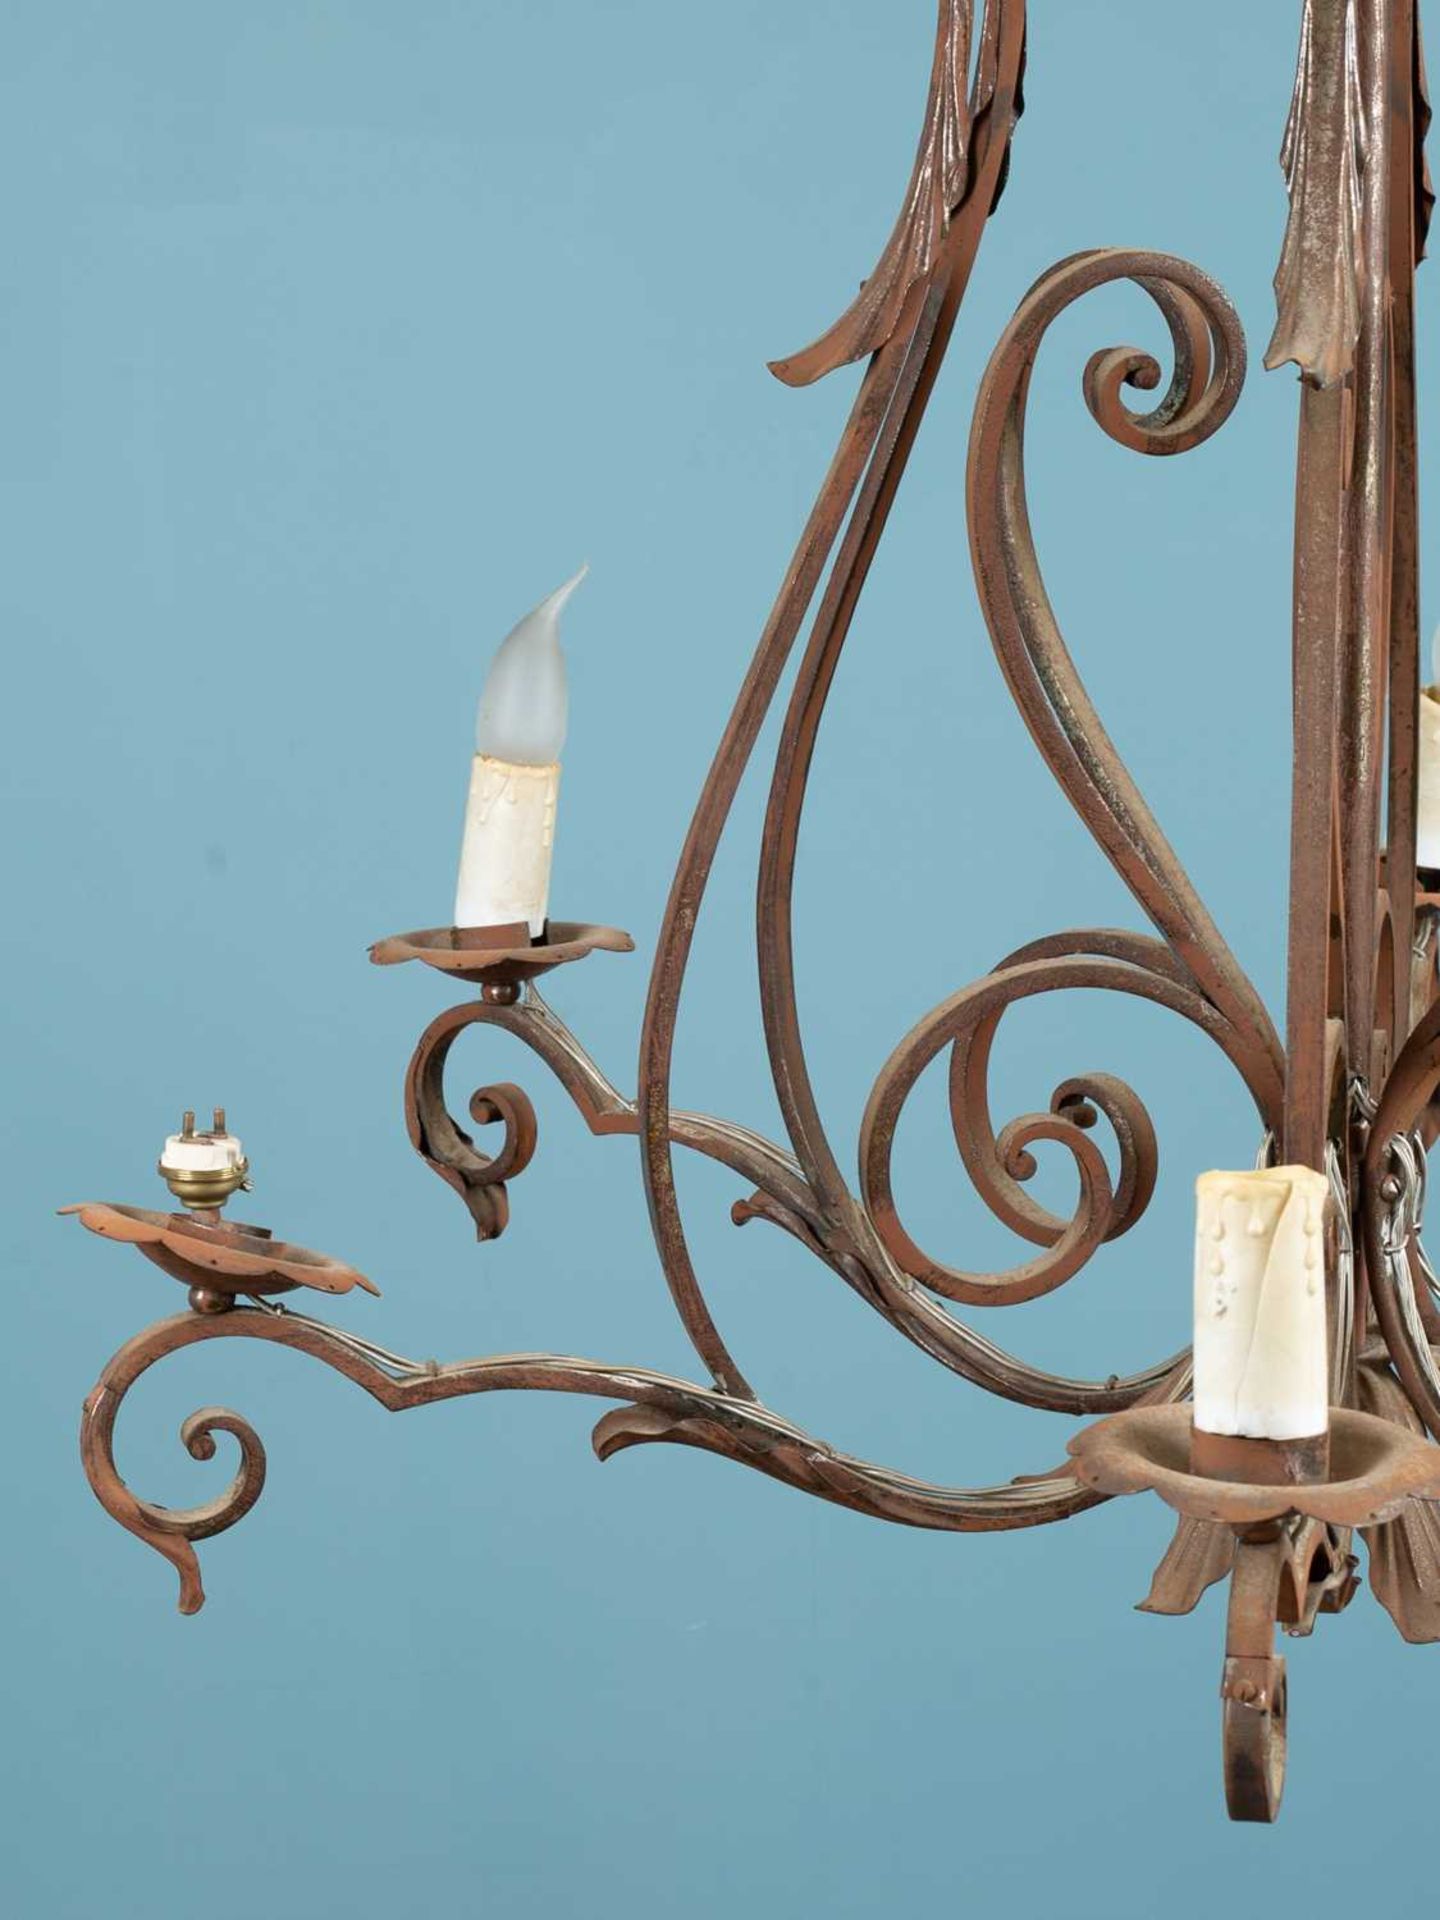 A 19th century antique wrought iron chandelier - Image 2 of 3